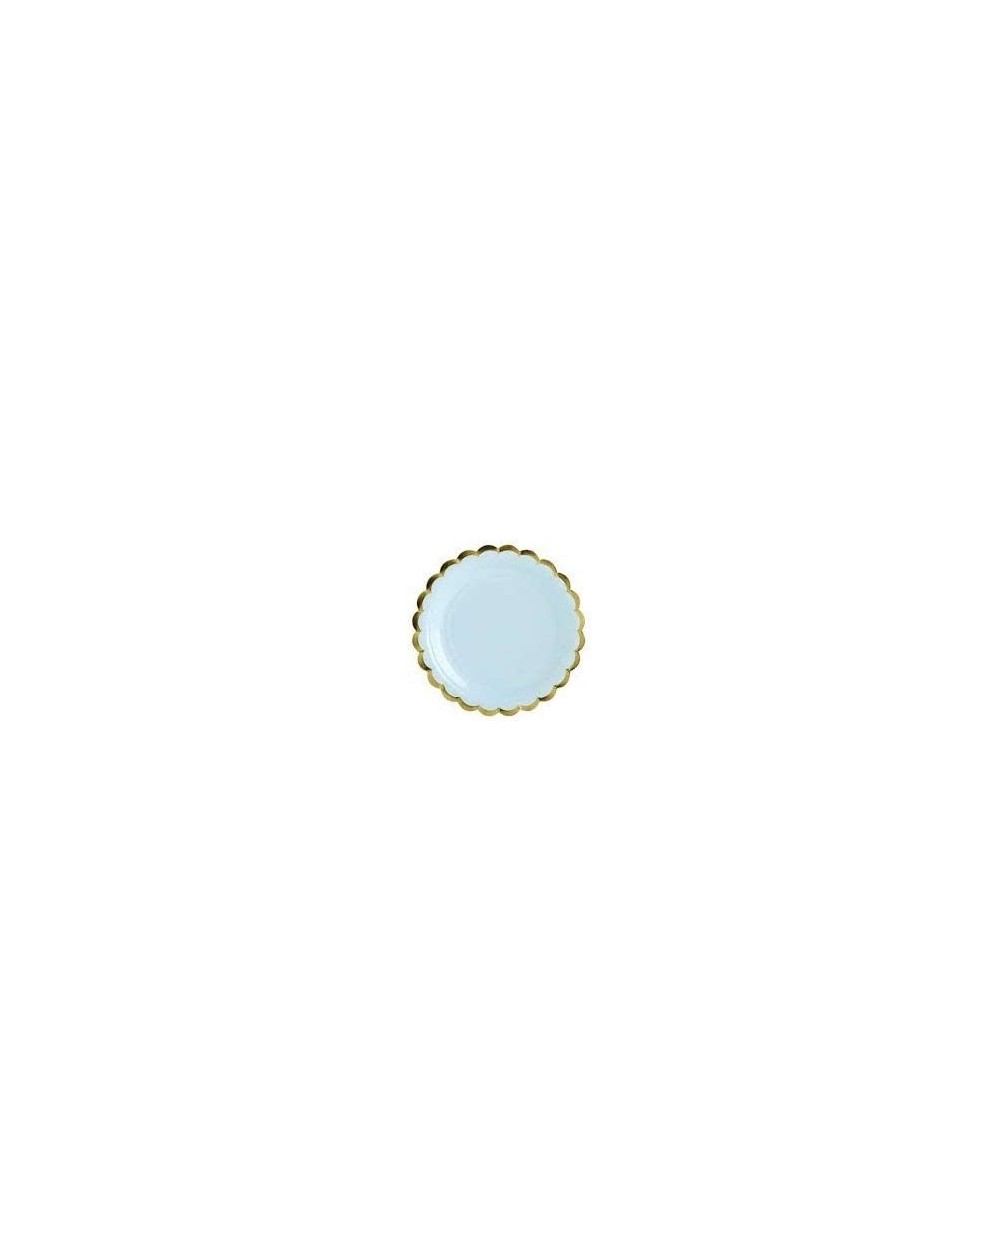 Tableware Gold Rimmed Party Paper Plates (Round Plates- Baby Blue) Baby Boy Shower Paper Plates - Baby Blue - C418O9ZH75X $11.40